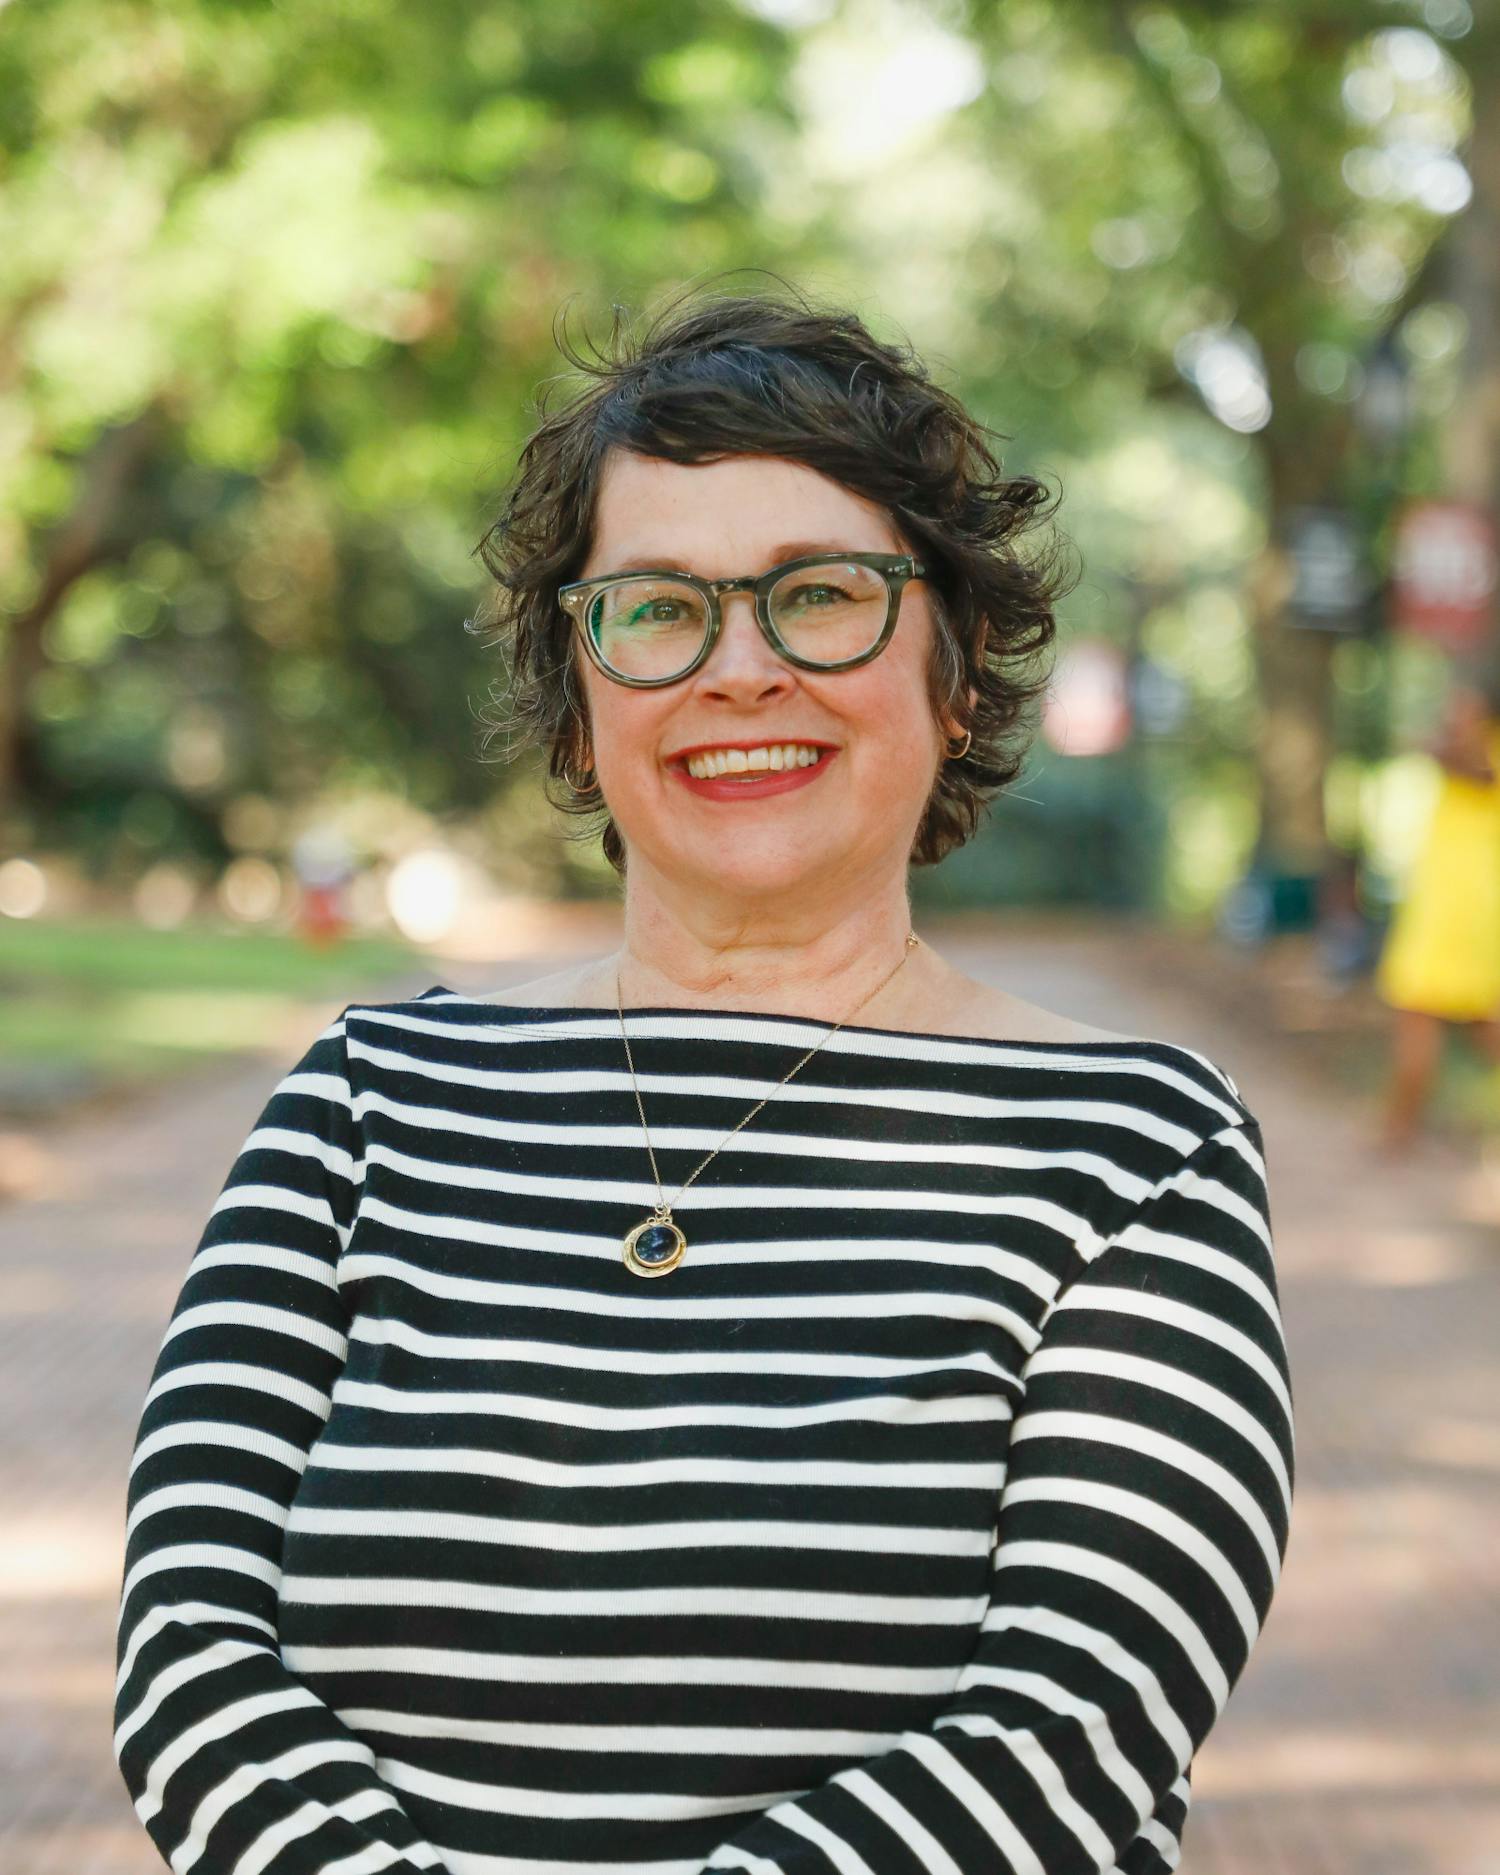 A portrait of Rachel Brasell, the new basic needs coordinator at the University of South Carolina. Brasell plans to address housing, food and financial needs for students.